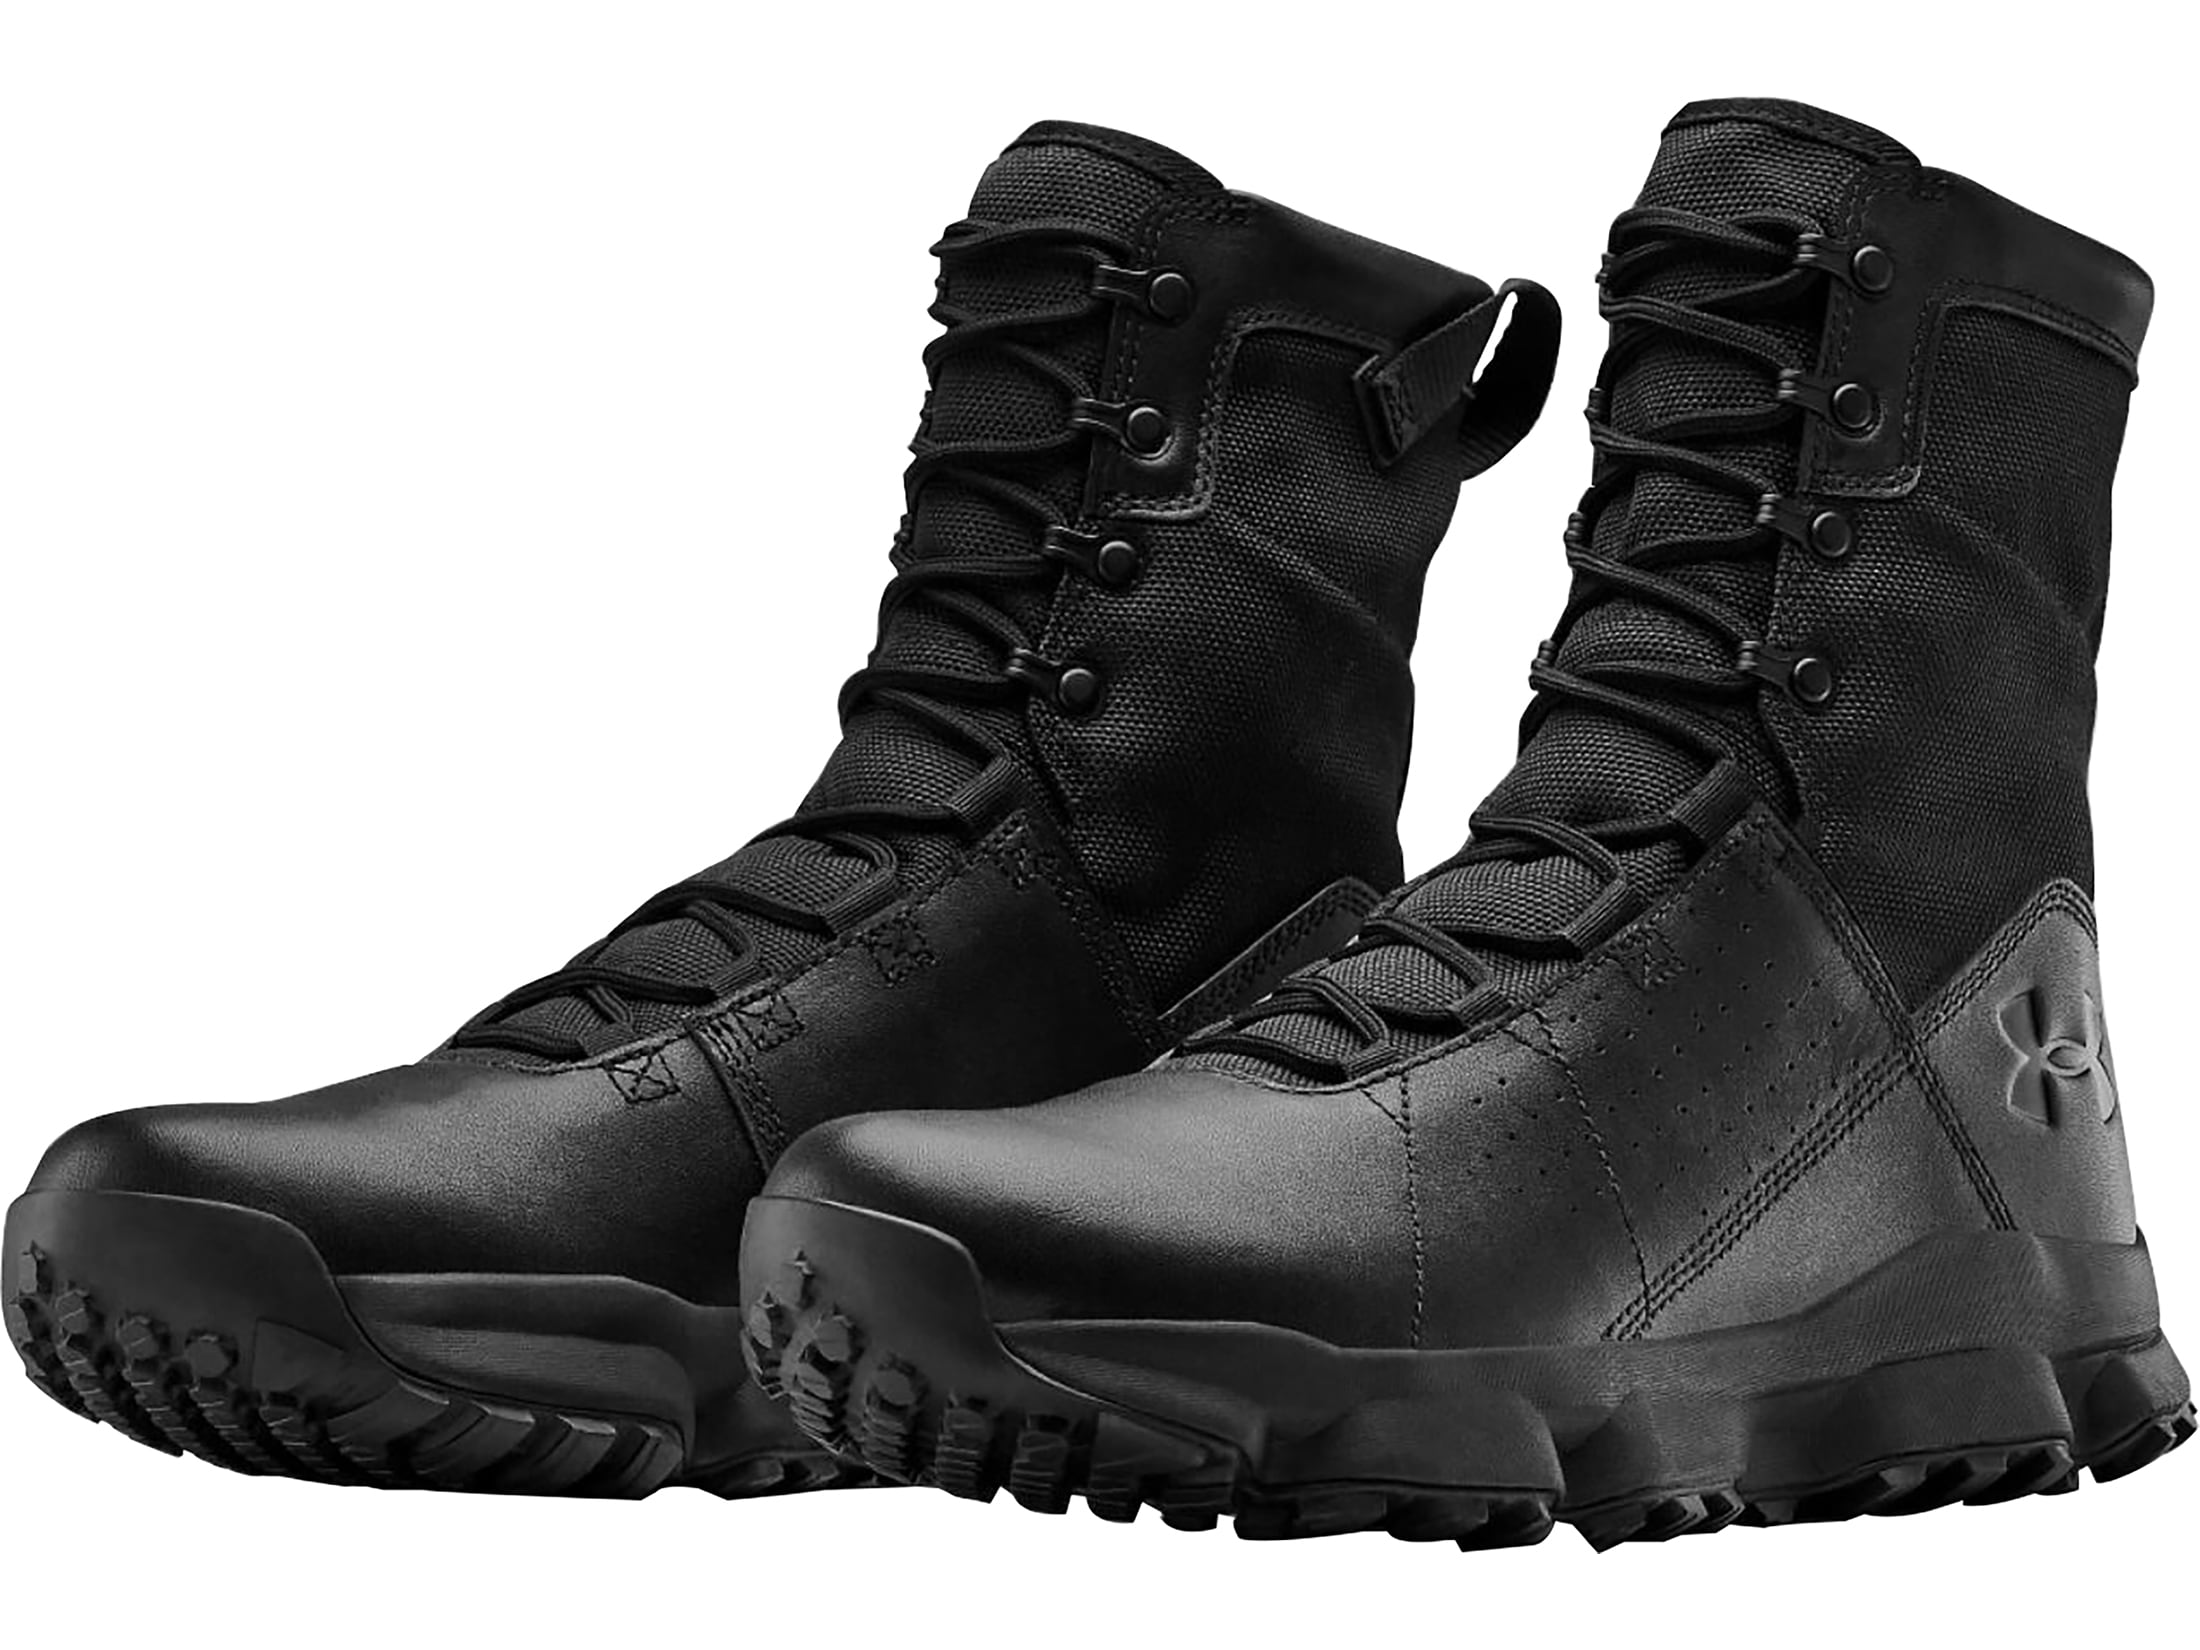 Under Armour Tactical UA Tac Loadout Tactical Boots Nylon/Leather